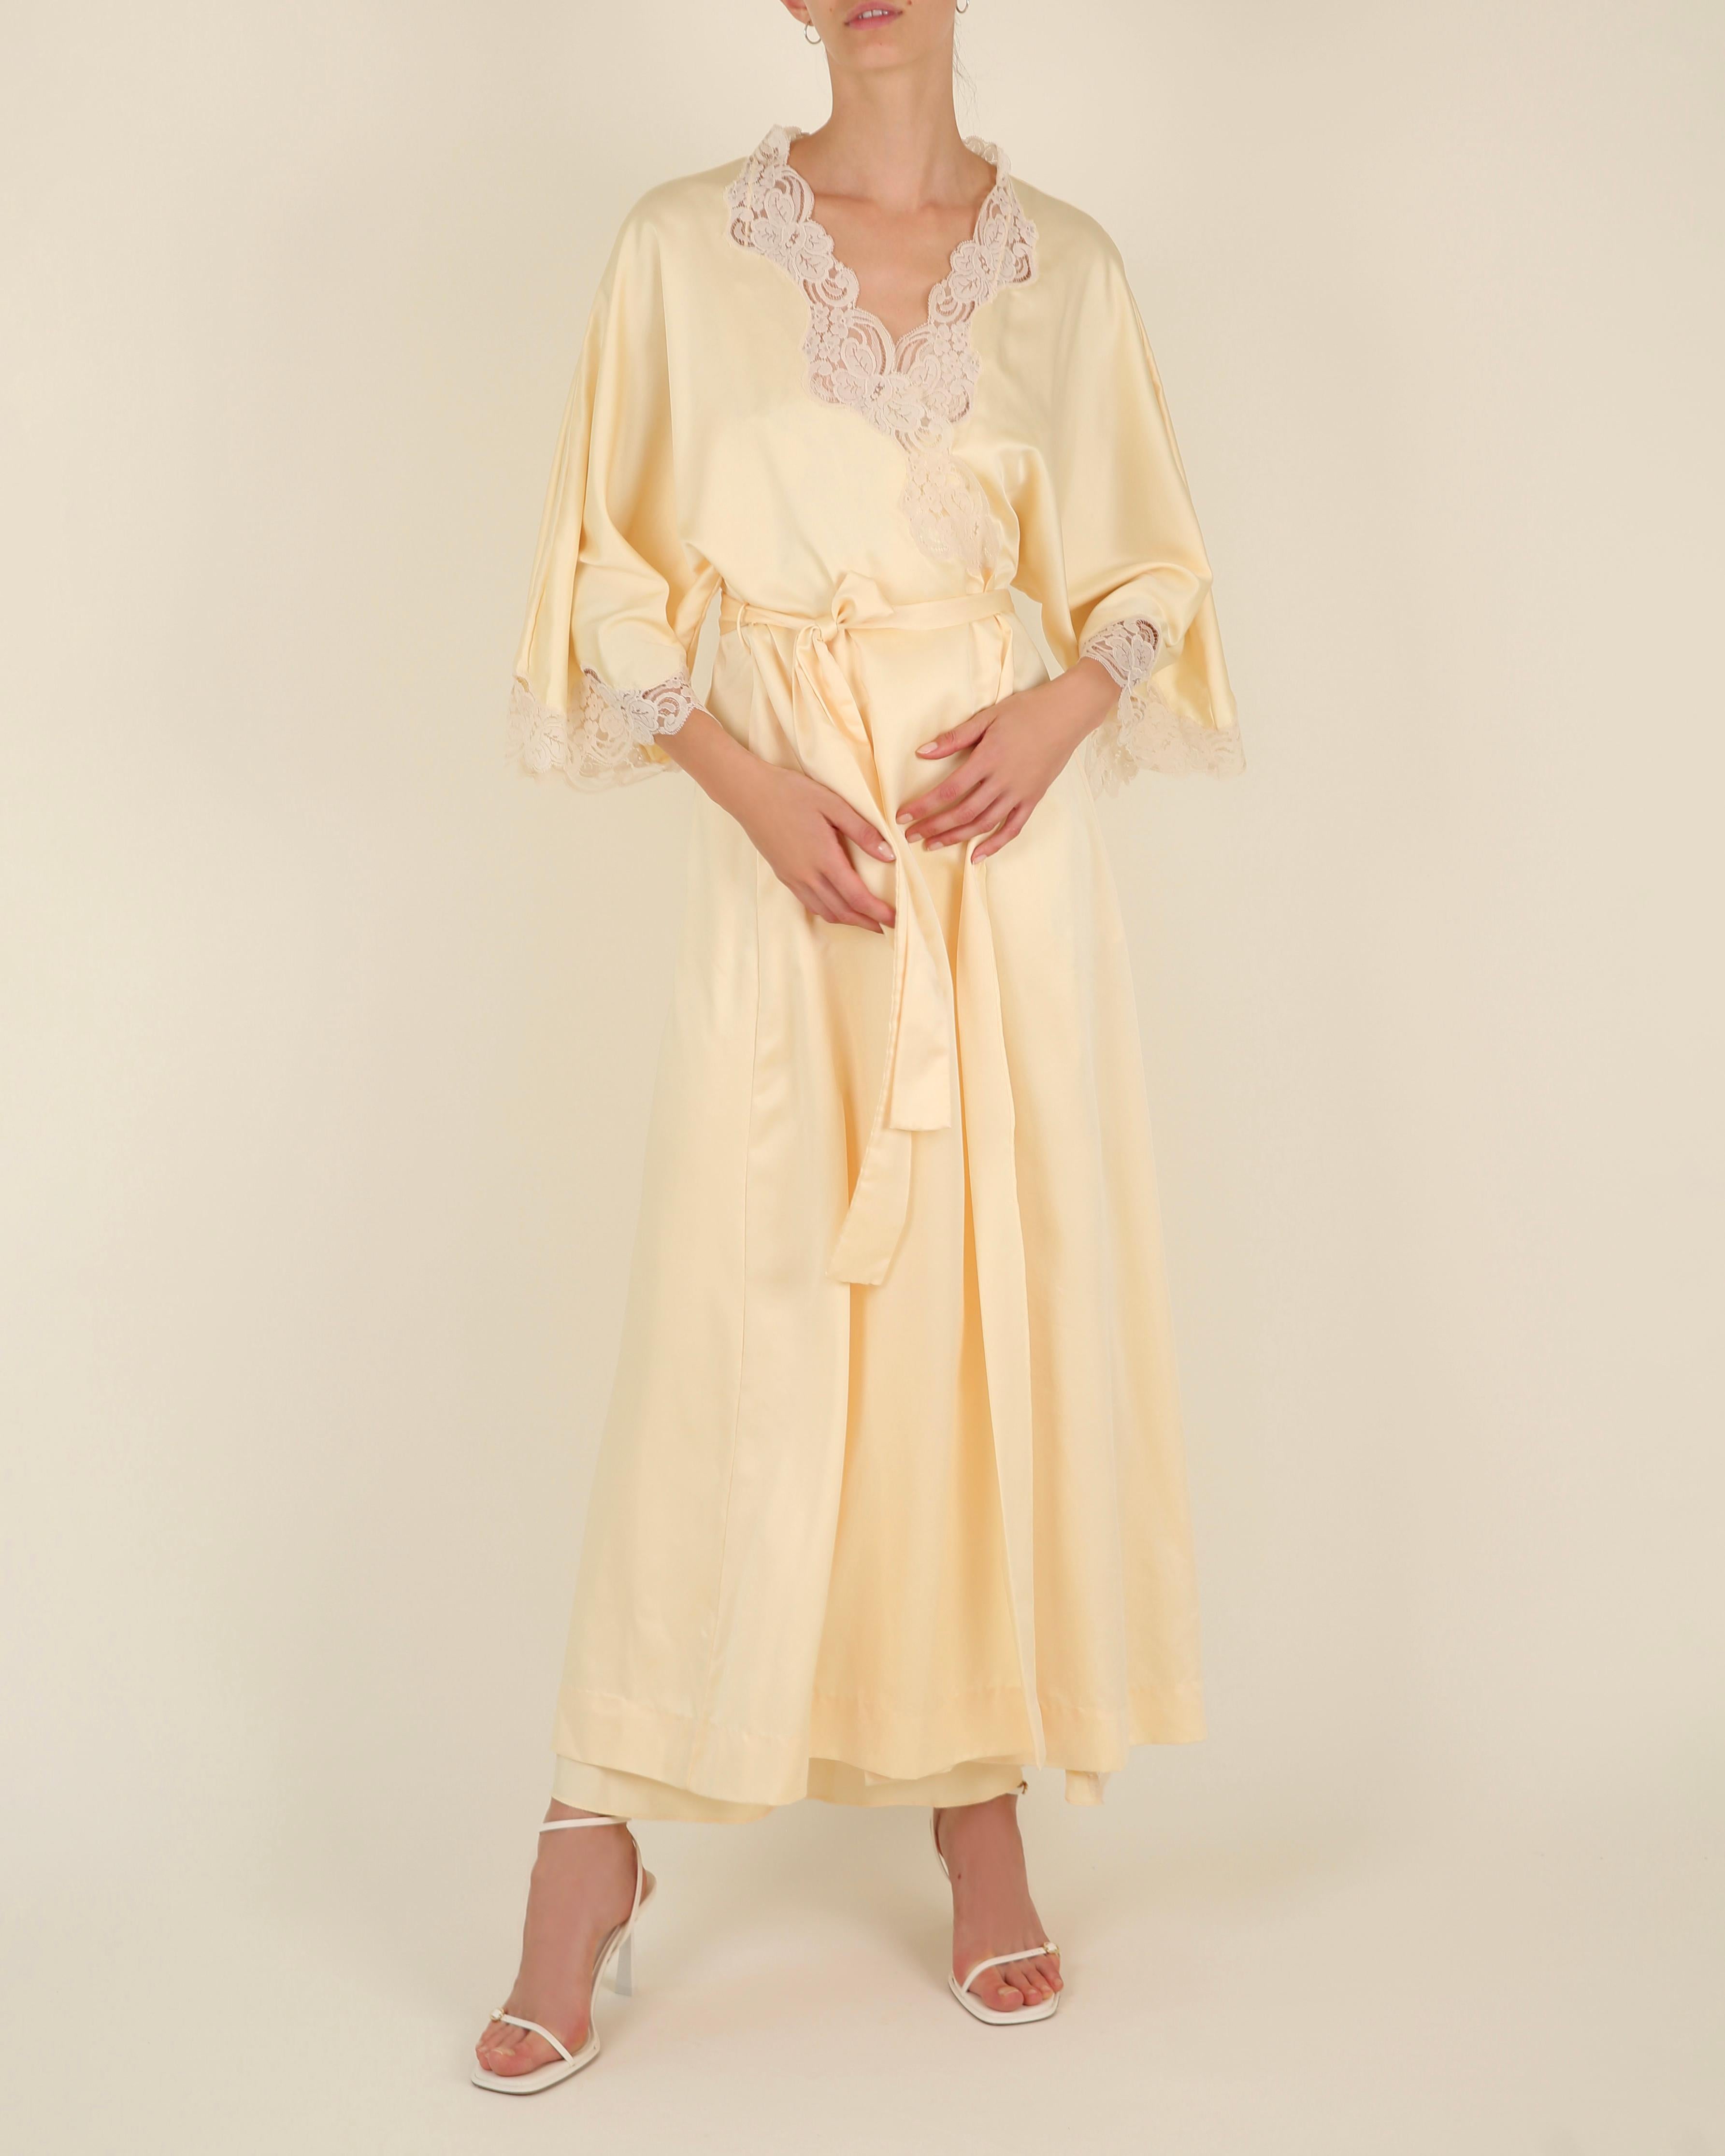 Vintage 1970's silk lace yellow backless thigh slit night gown slip dress & robe 14